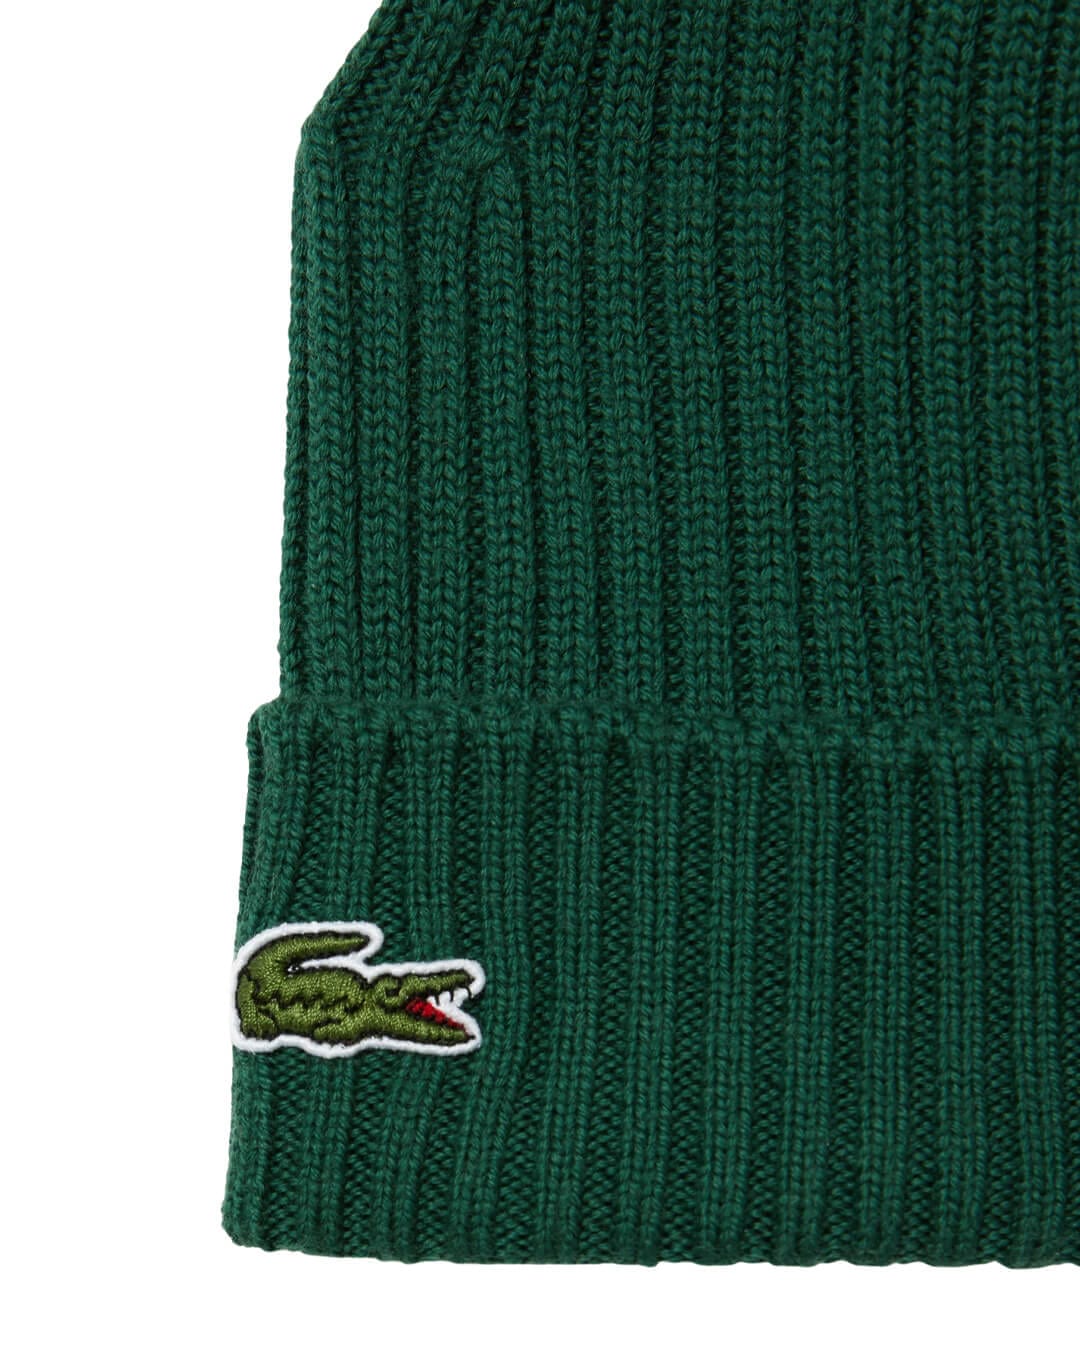 Lacoste Caps ONE SIZE Lacoste Unisex Ribbed Wool Green Beanie